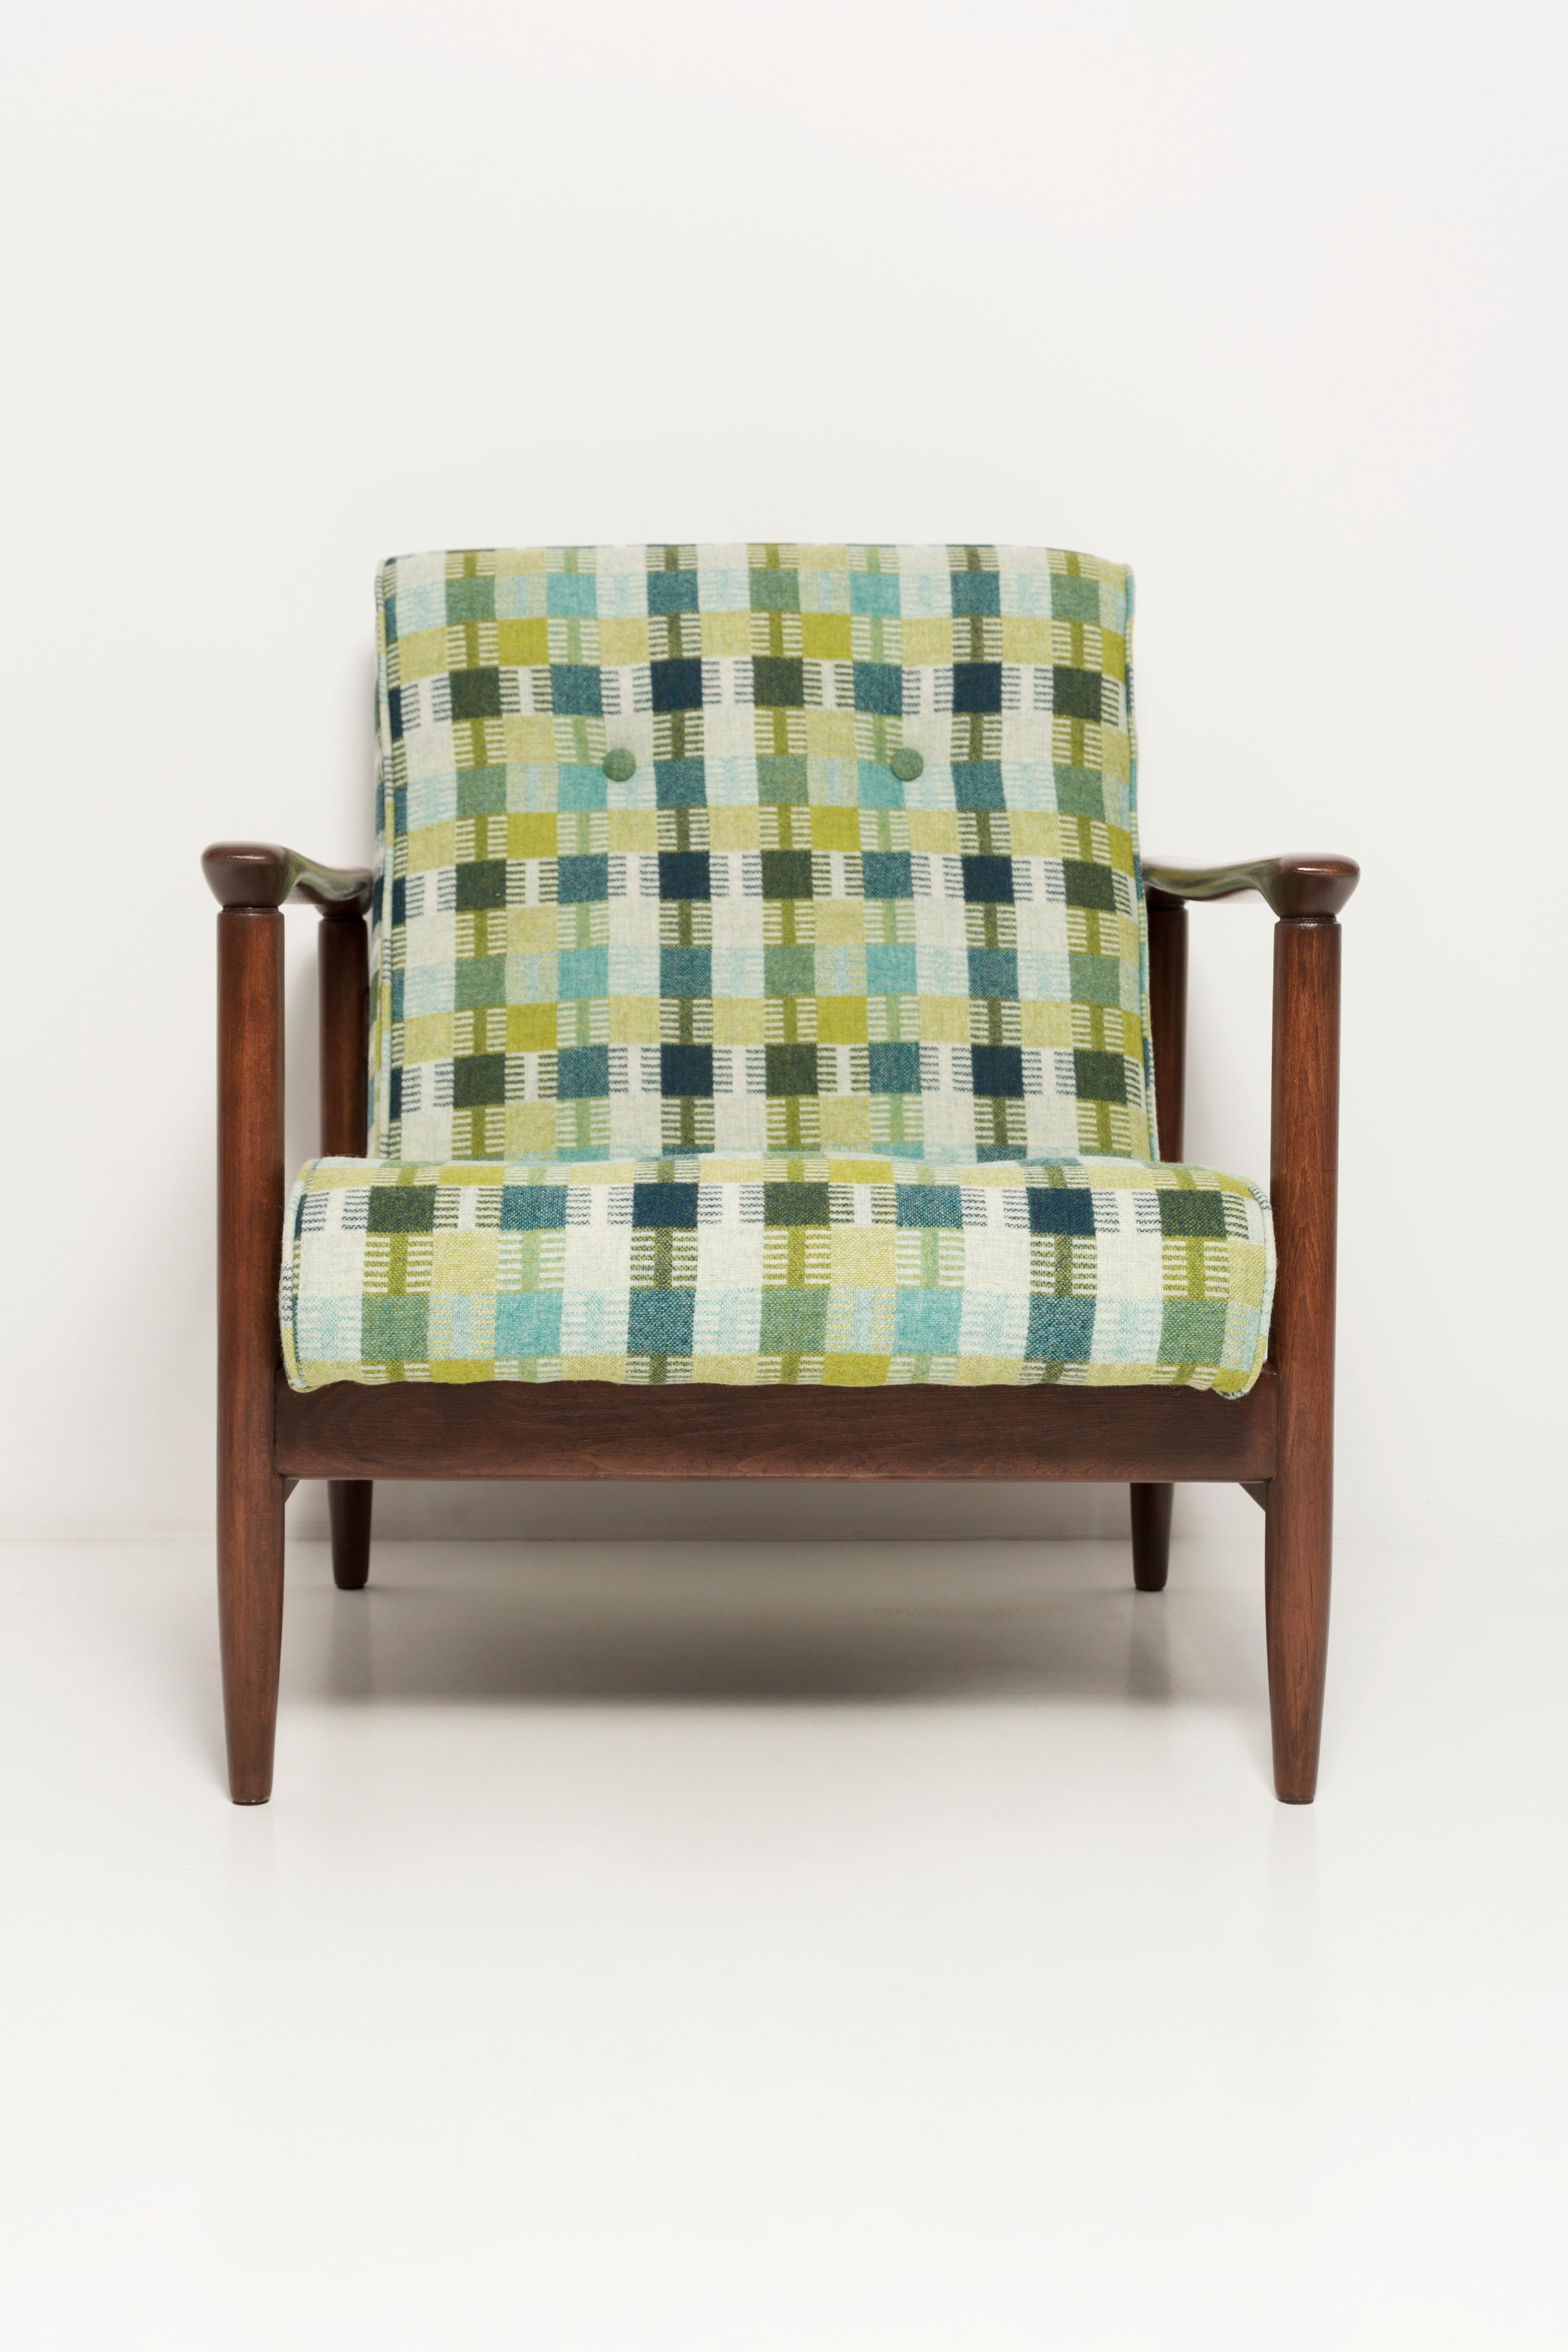 Pair of Mid-Century Green Wool Armchairs, GFM 142, Edmund Homa, Europe, 1960s For Sale 3